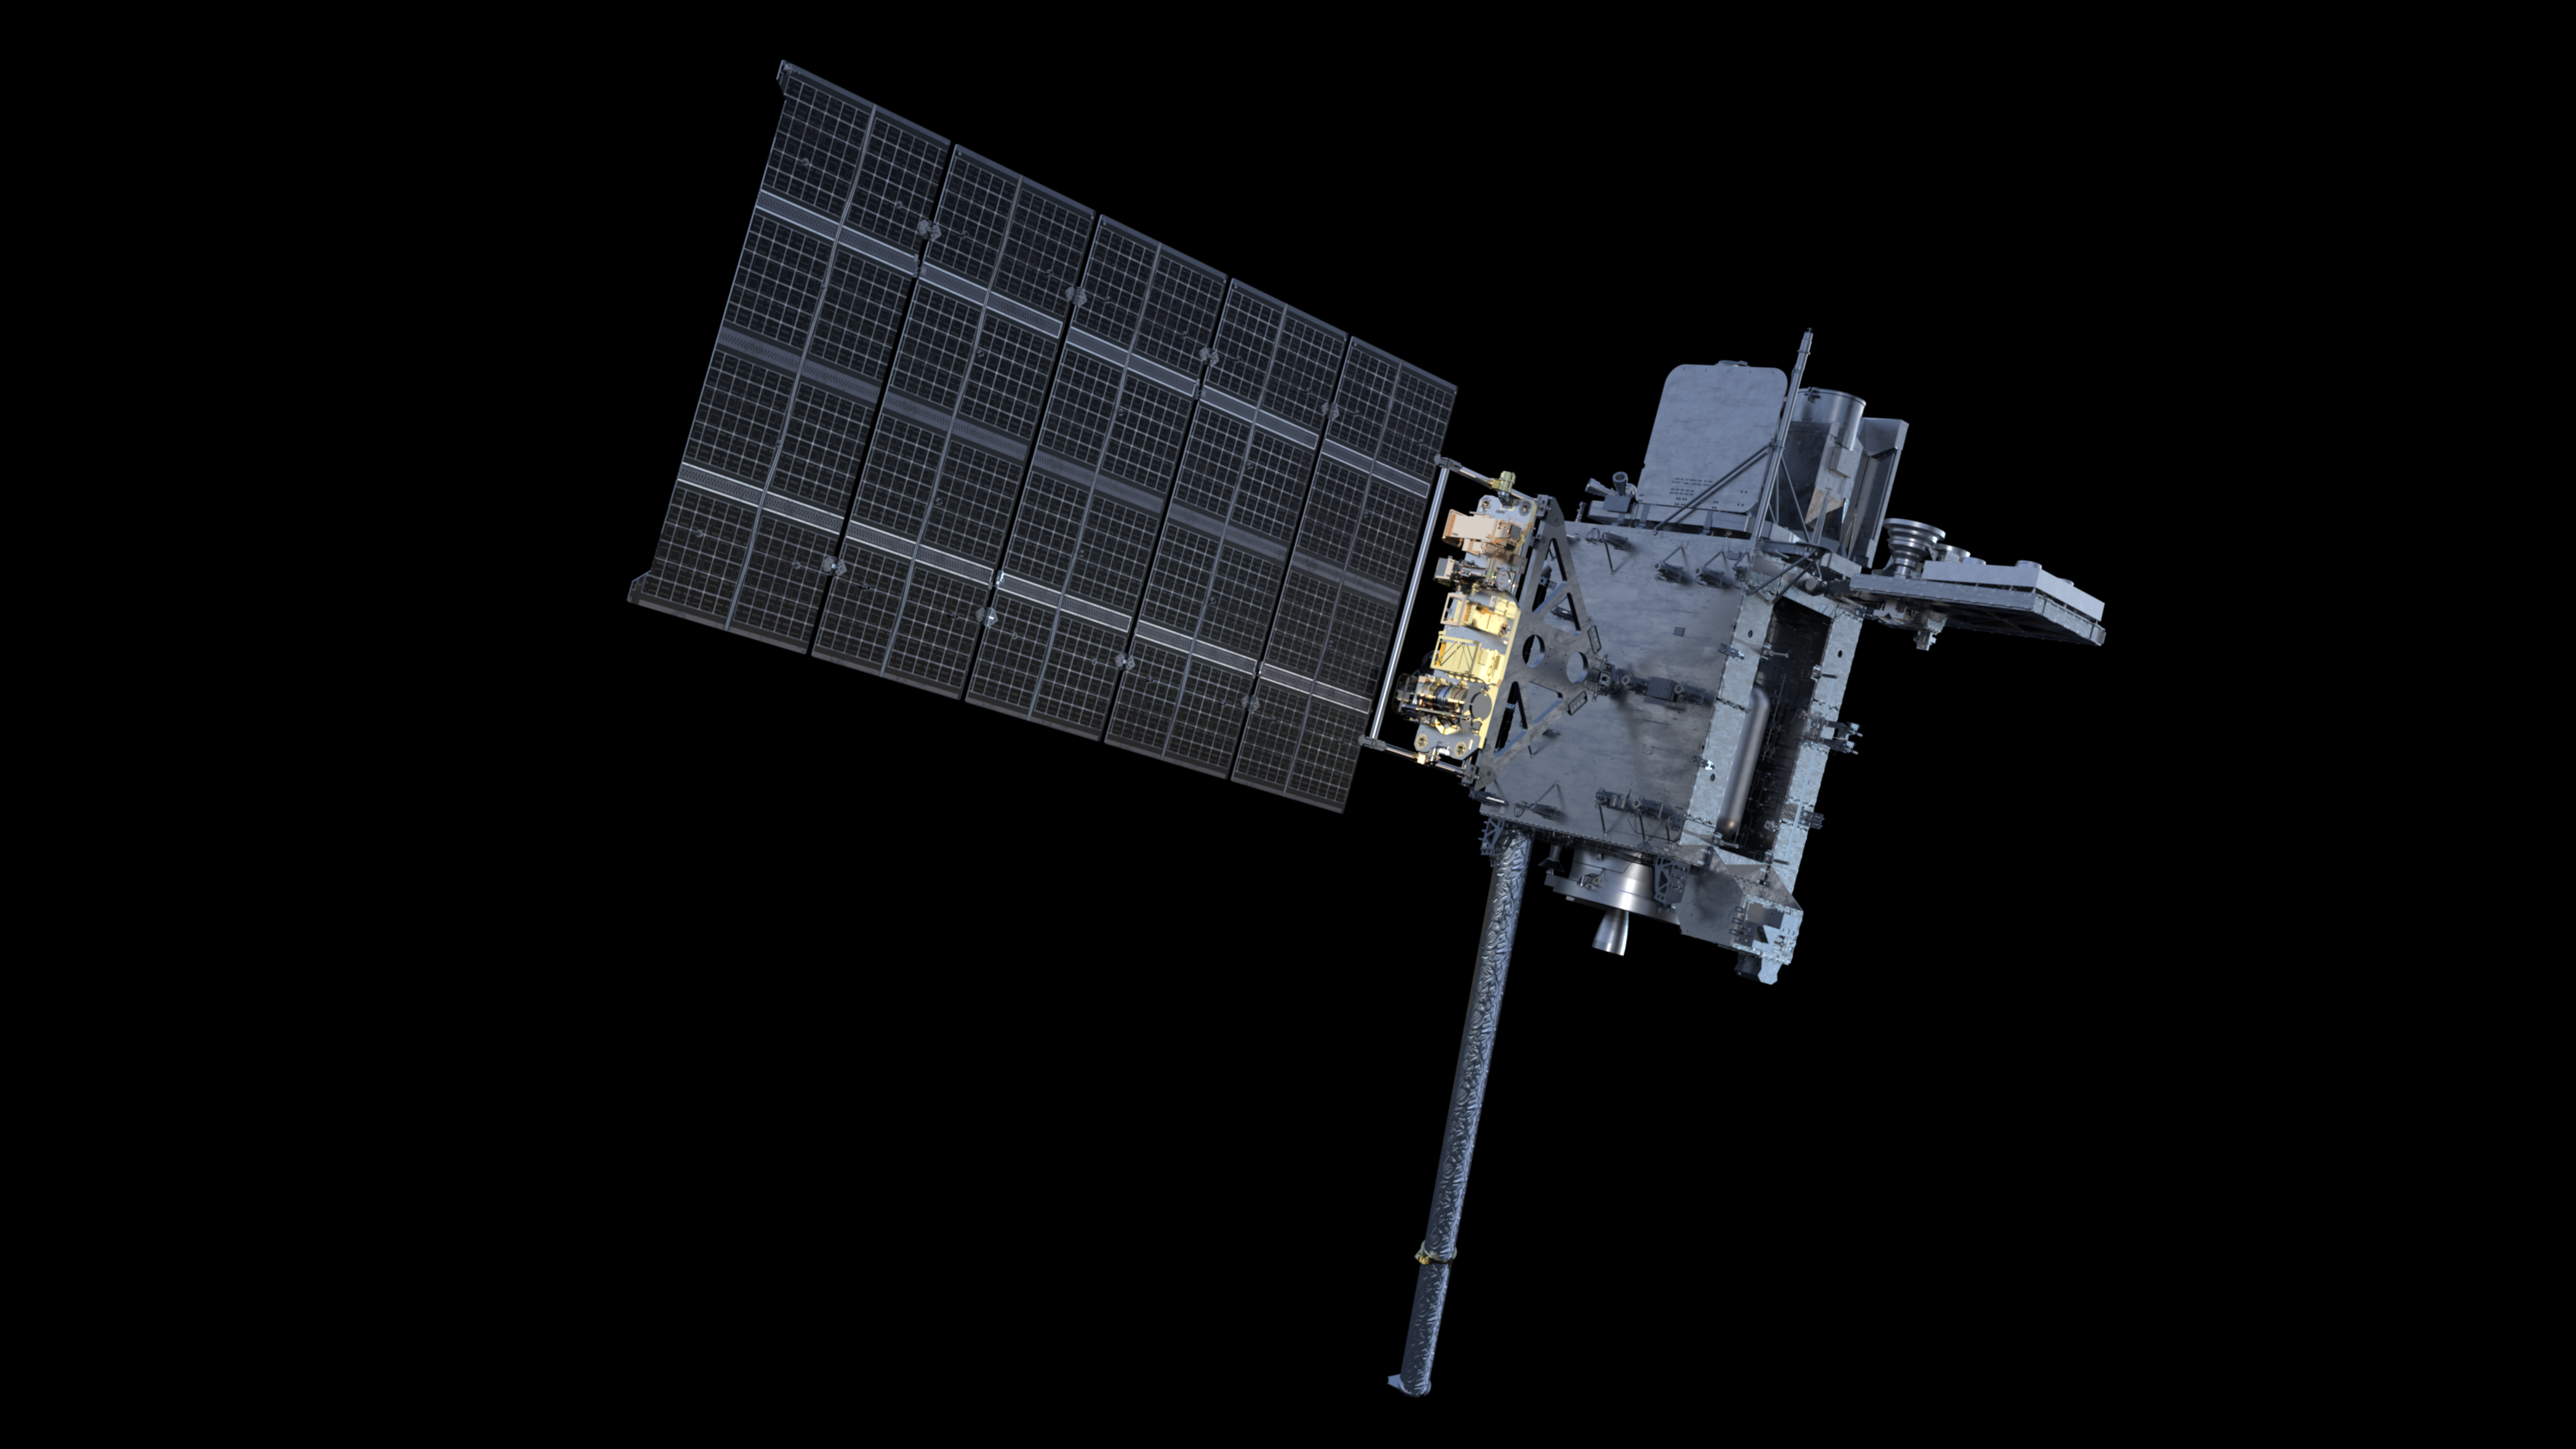 a cube-shaped spacecraft with two rectangular solar panels in orbit high above the earth